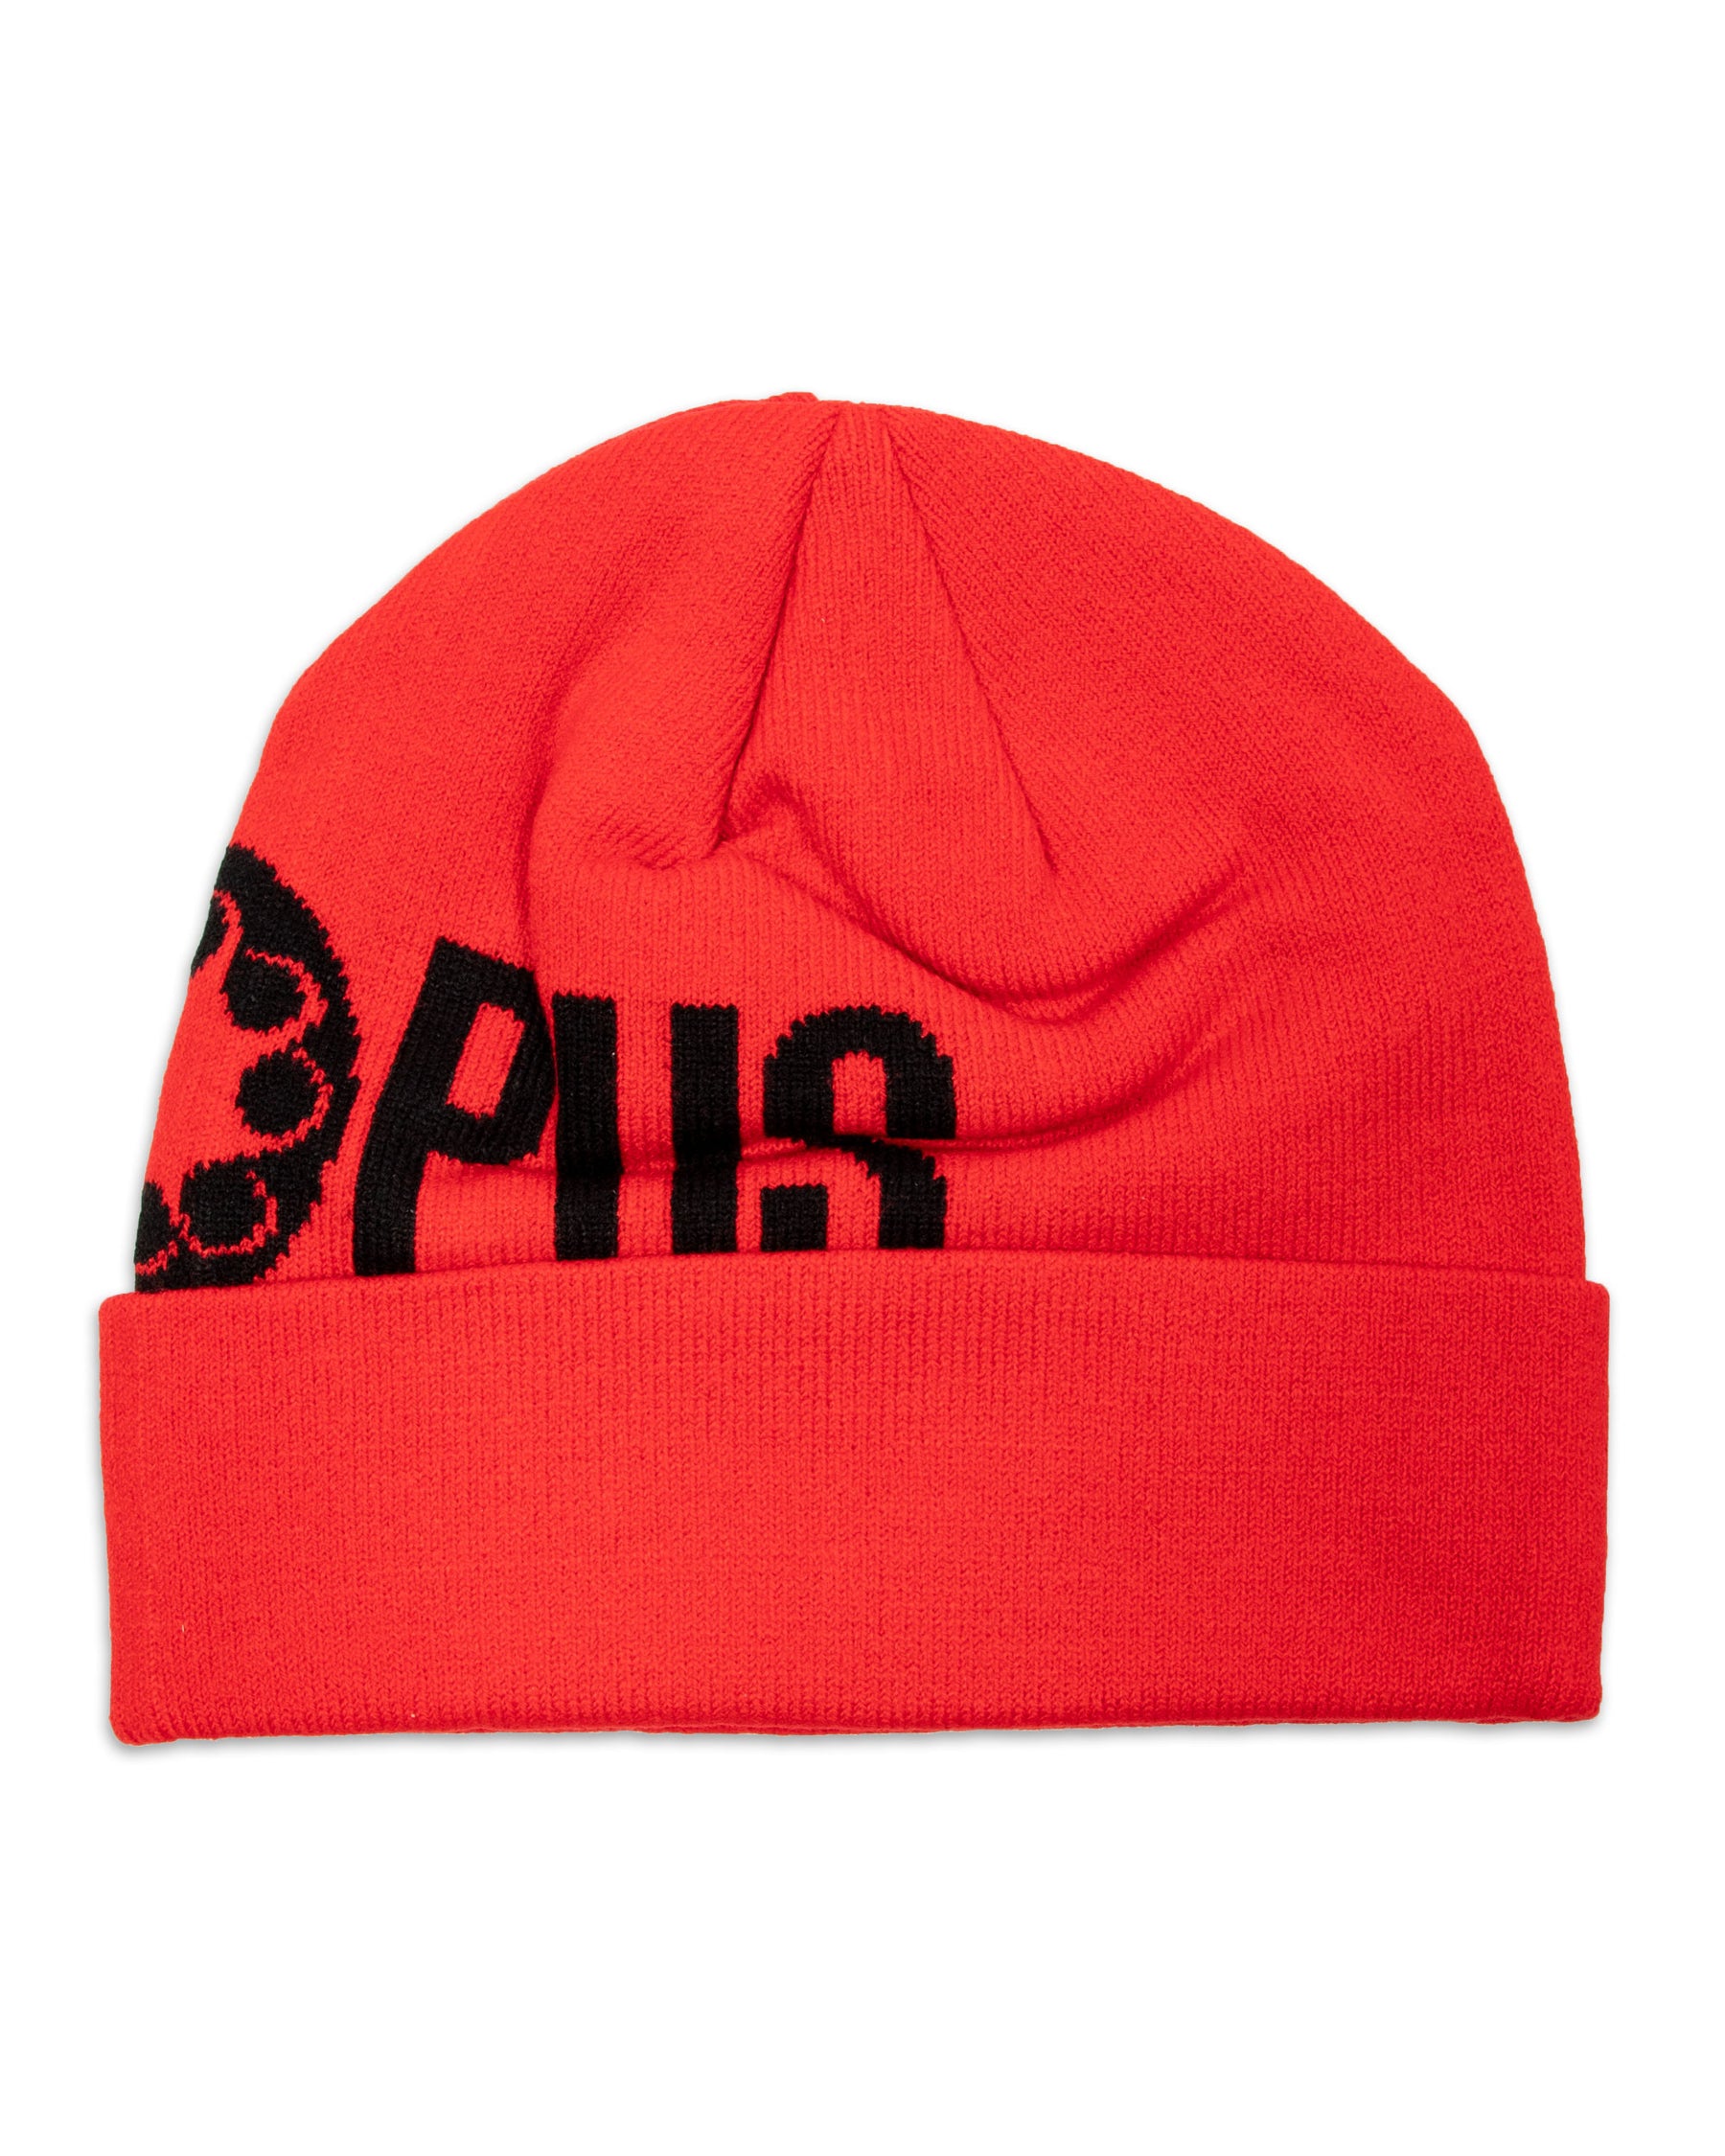 Cappello Octopus Logo Fold Beanie 21WOBNP03-Red